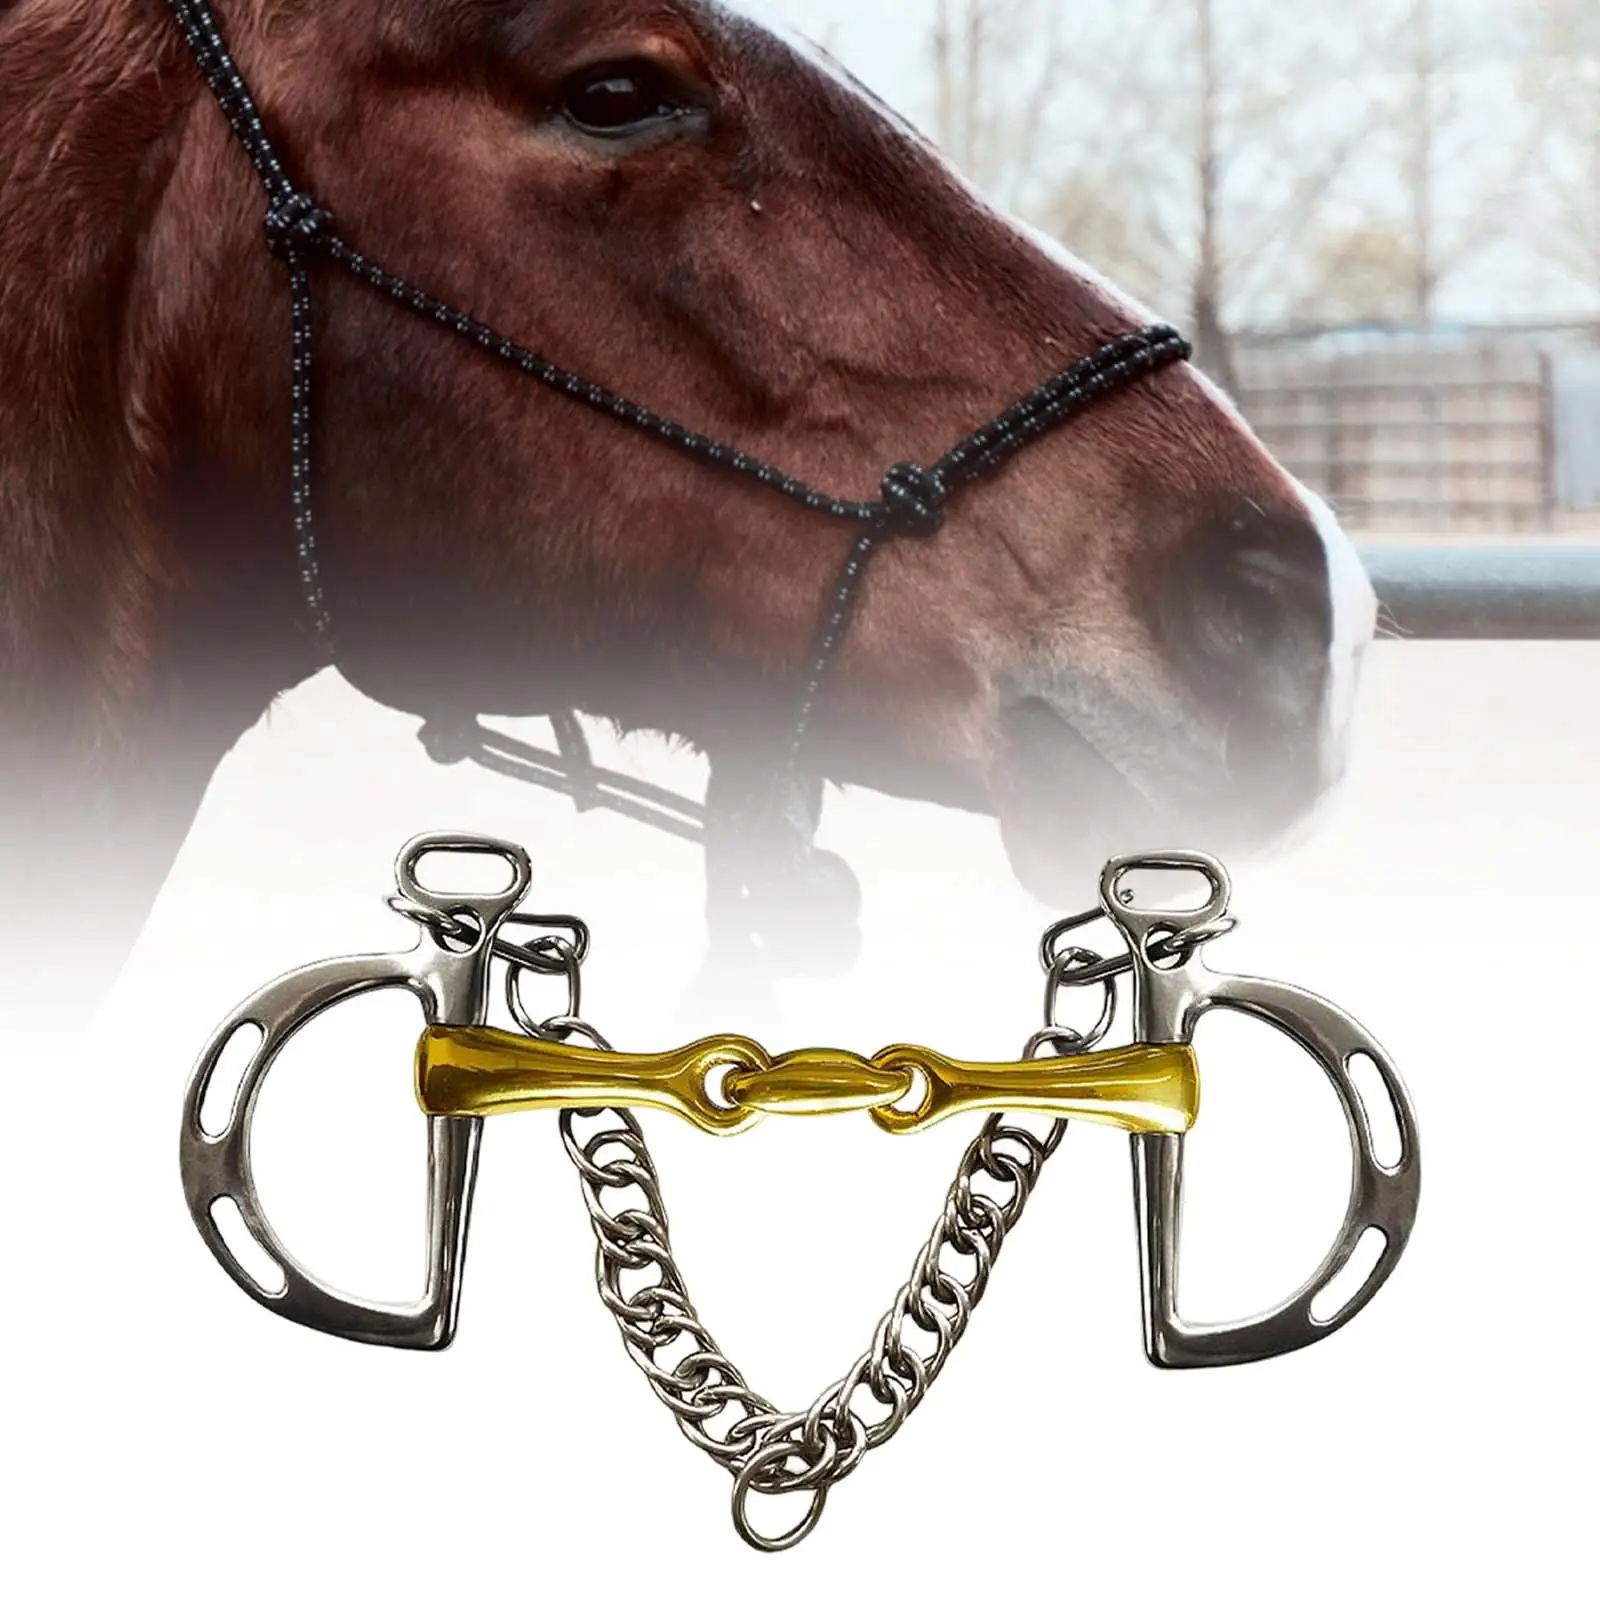 Horse Bit Copper Mouth Harness W/Curb Hooks Chain Stainless Steel Center Roller with Silver Trims for Equestrian Horse Bridle